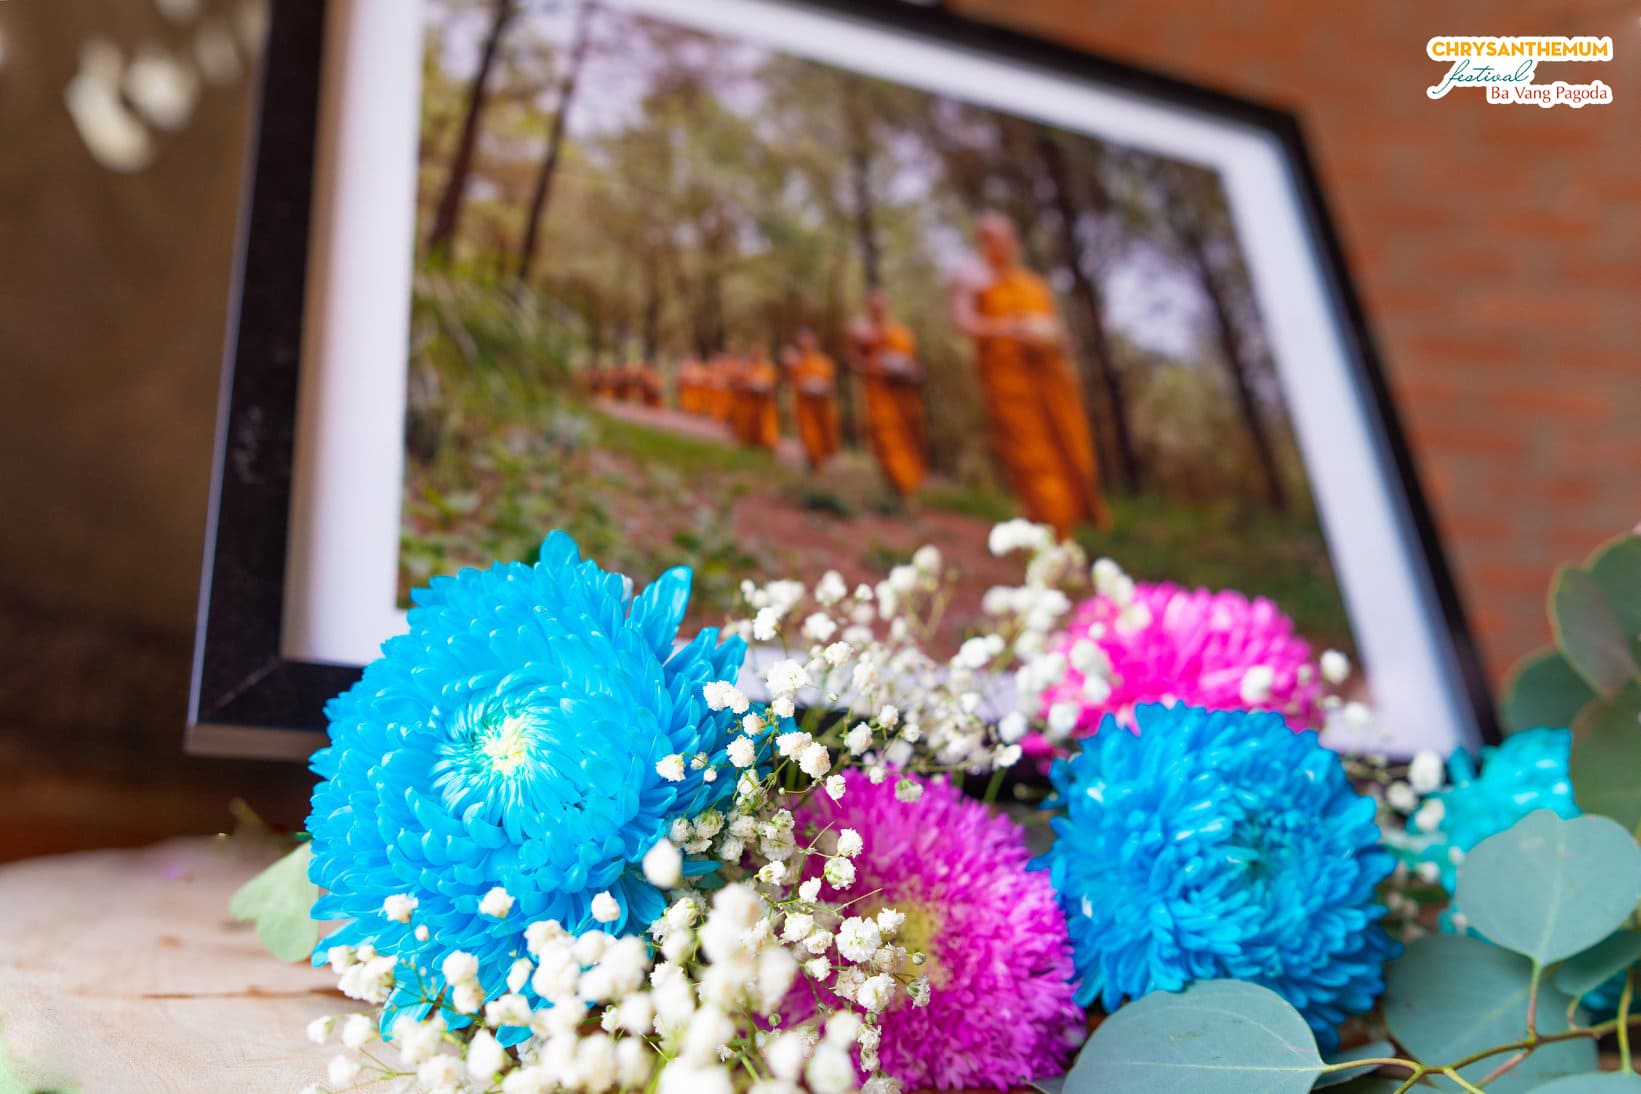 Photos are embellished with many kinds of chrysanthemums.